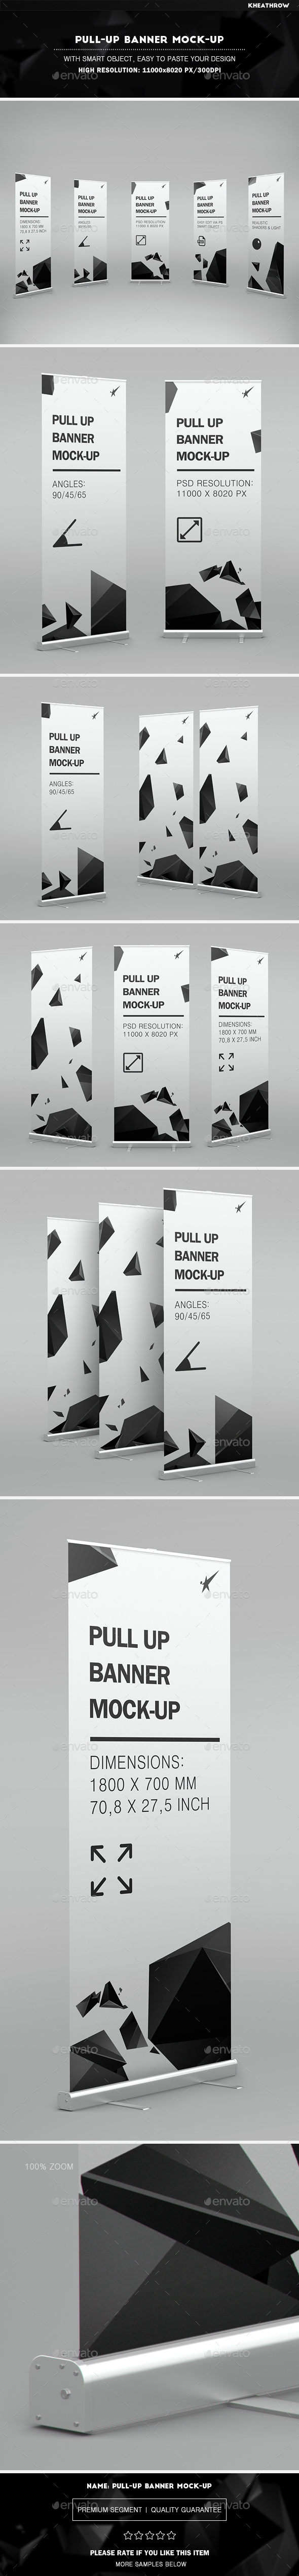 Download Pull-Up Banner Stand Mock-Up by Kheathrow | GraphicRiver